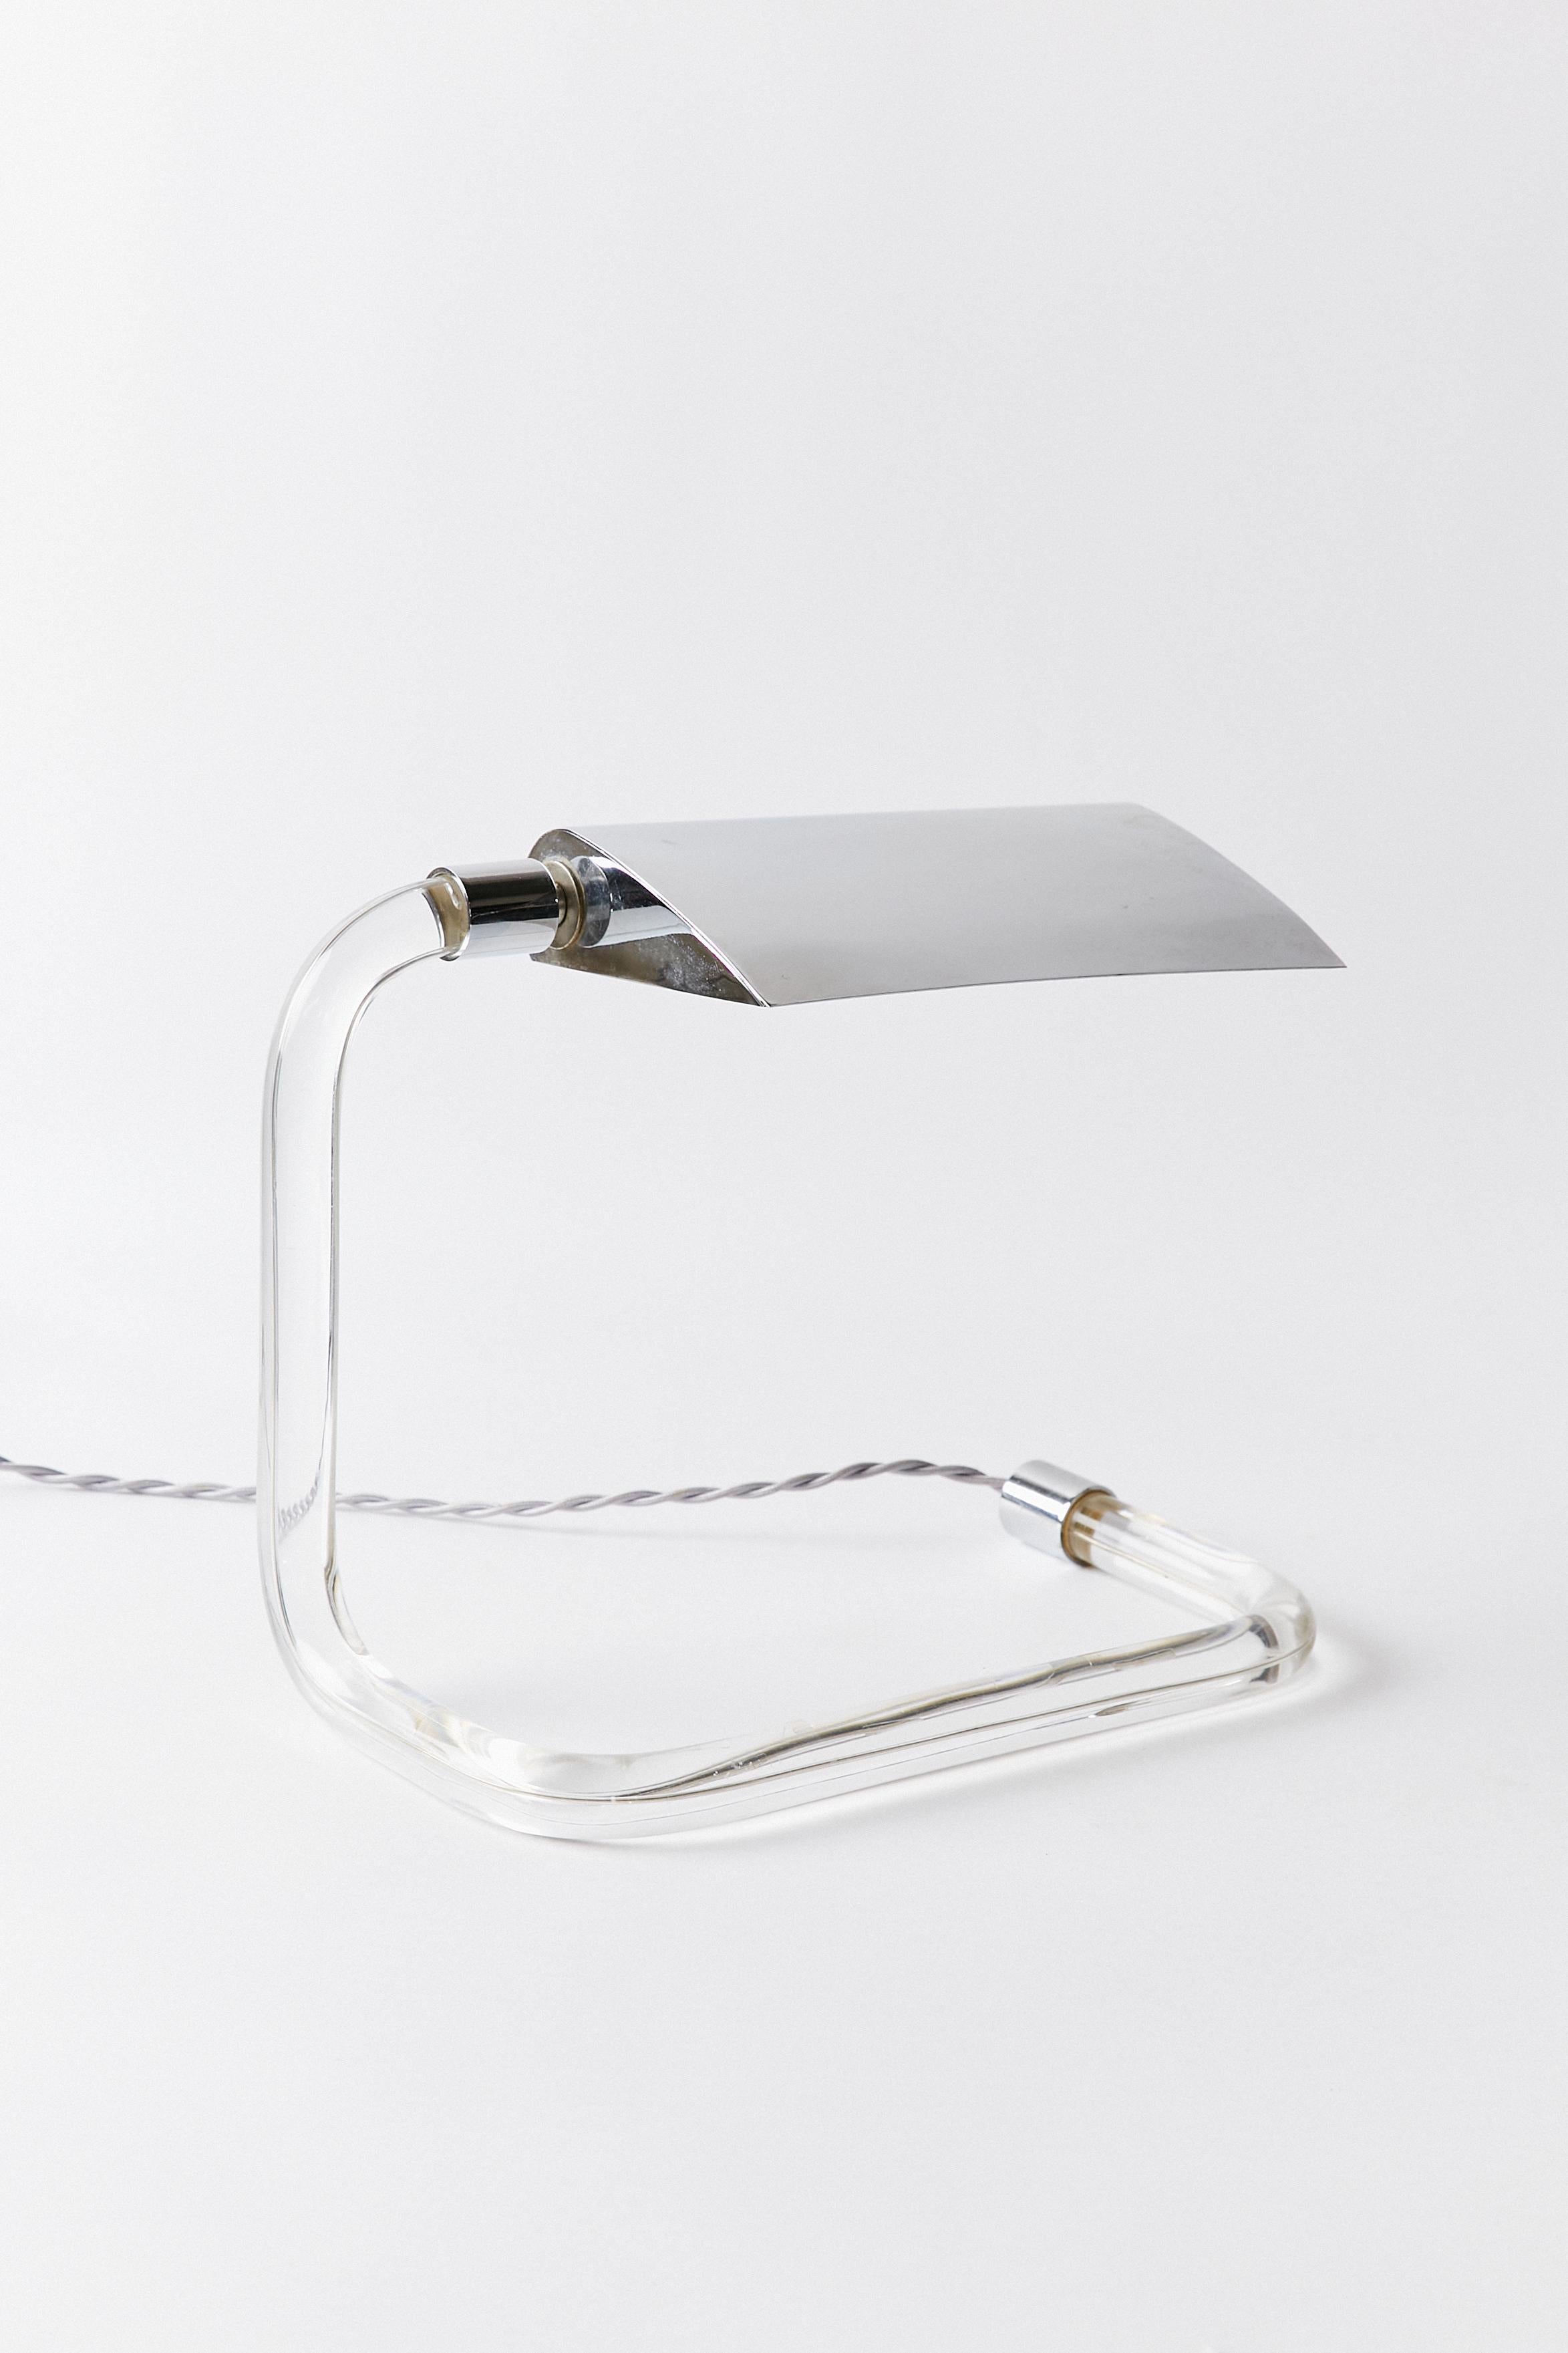 Set of two lucite and chrome desk lamps by Peter Hamburger, designed for Kovacs Lighting. This item has been rewired with braided cloth cord and new hardware.